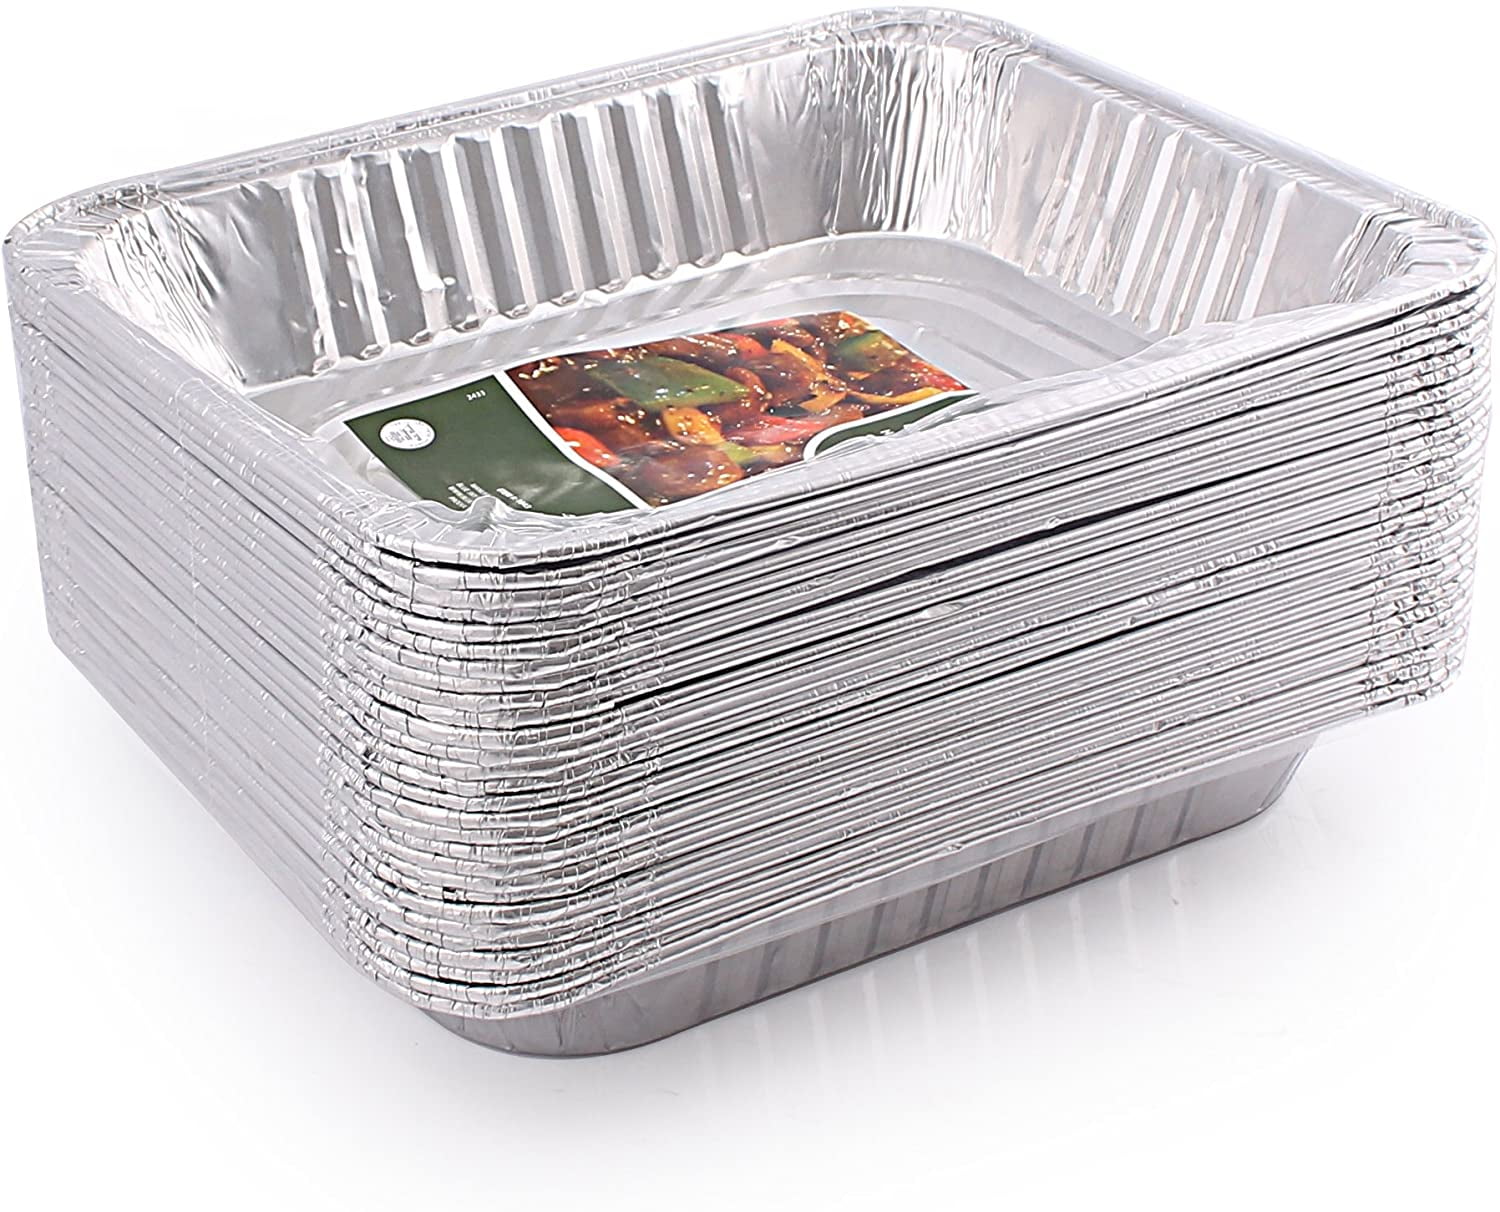 Aluminum Foil 9 X 13 Aluminum Steam Bench Pans Baking Pans and Drip Pans –  Suitable for Disposable Silver Foil Food Containers – Extra Thick and